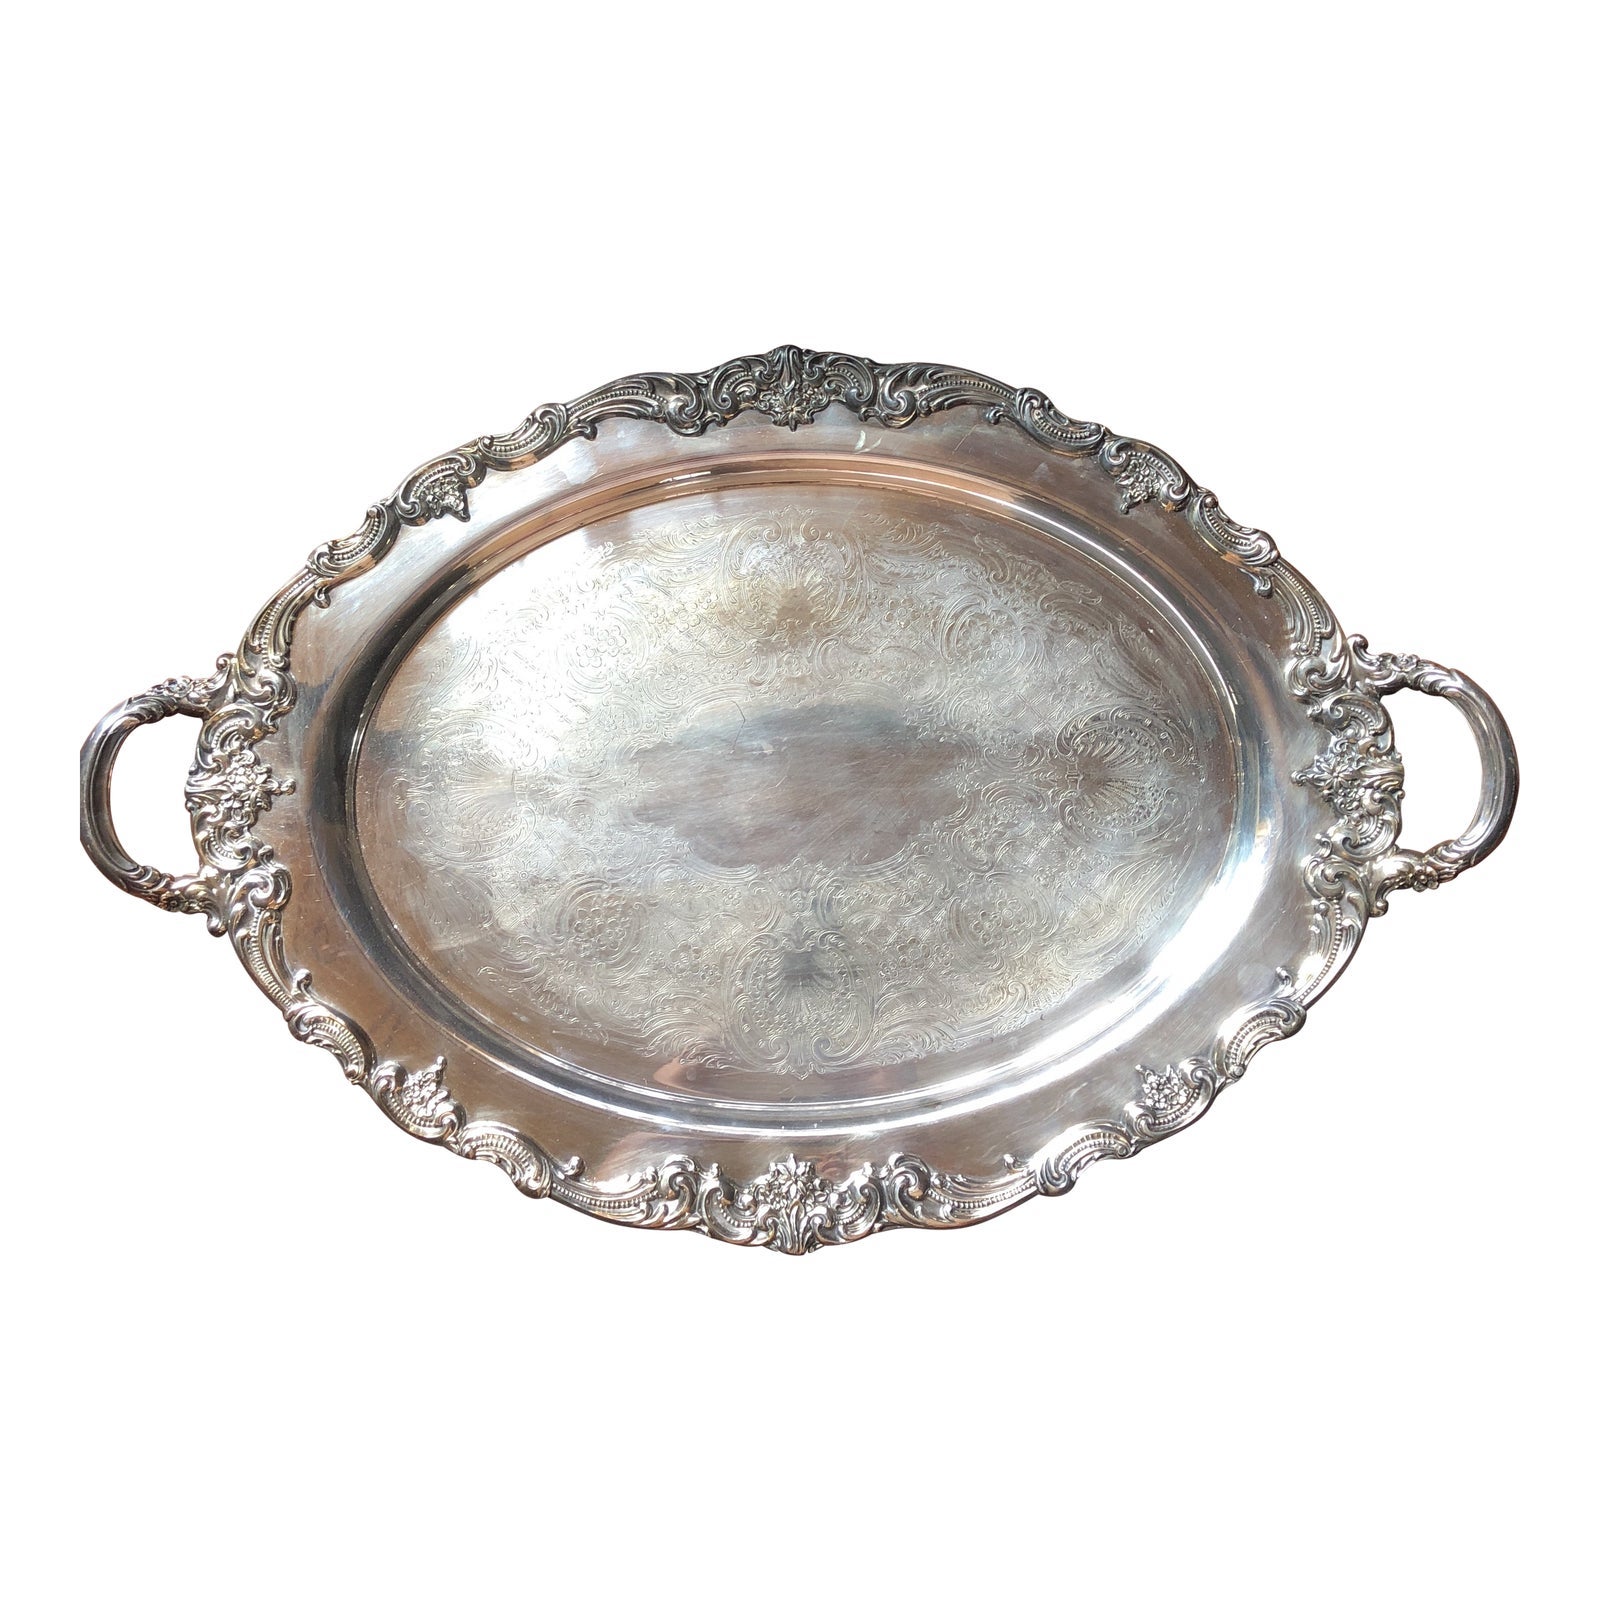 reed-and-barton-el-greco-large-silverplated-handled-serving-waiter-tray-4670